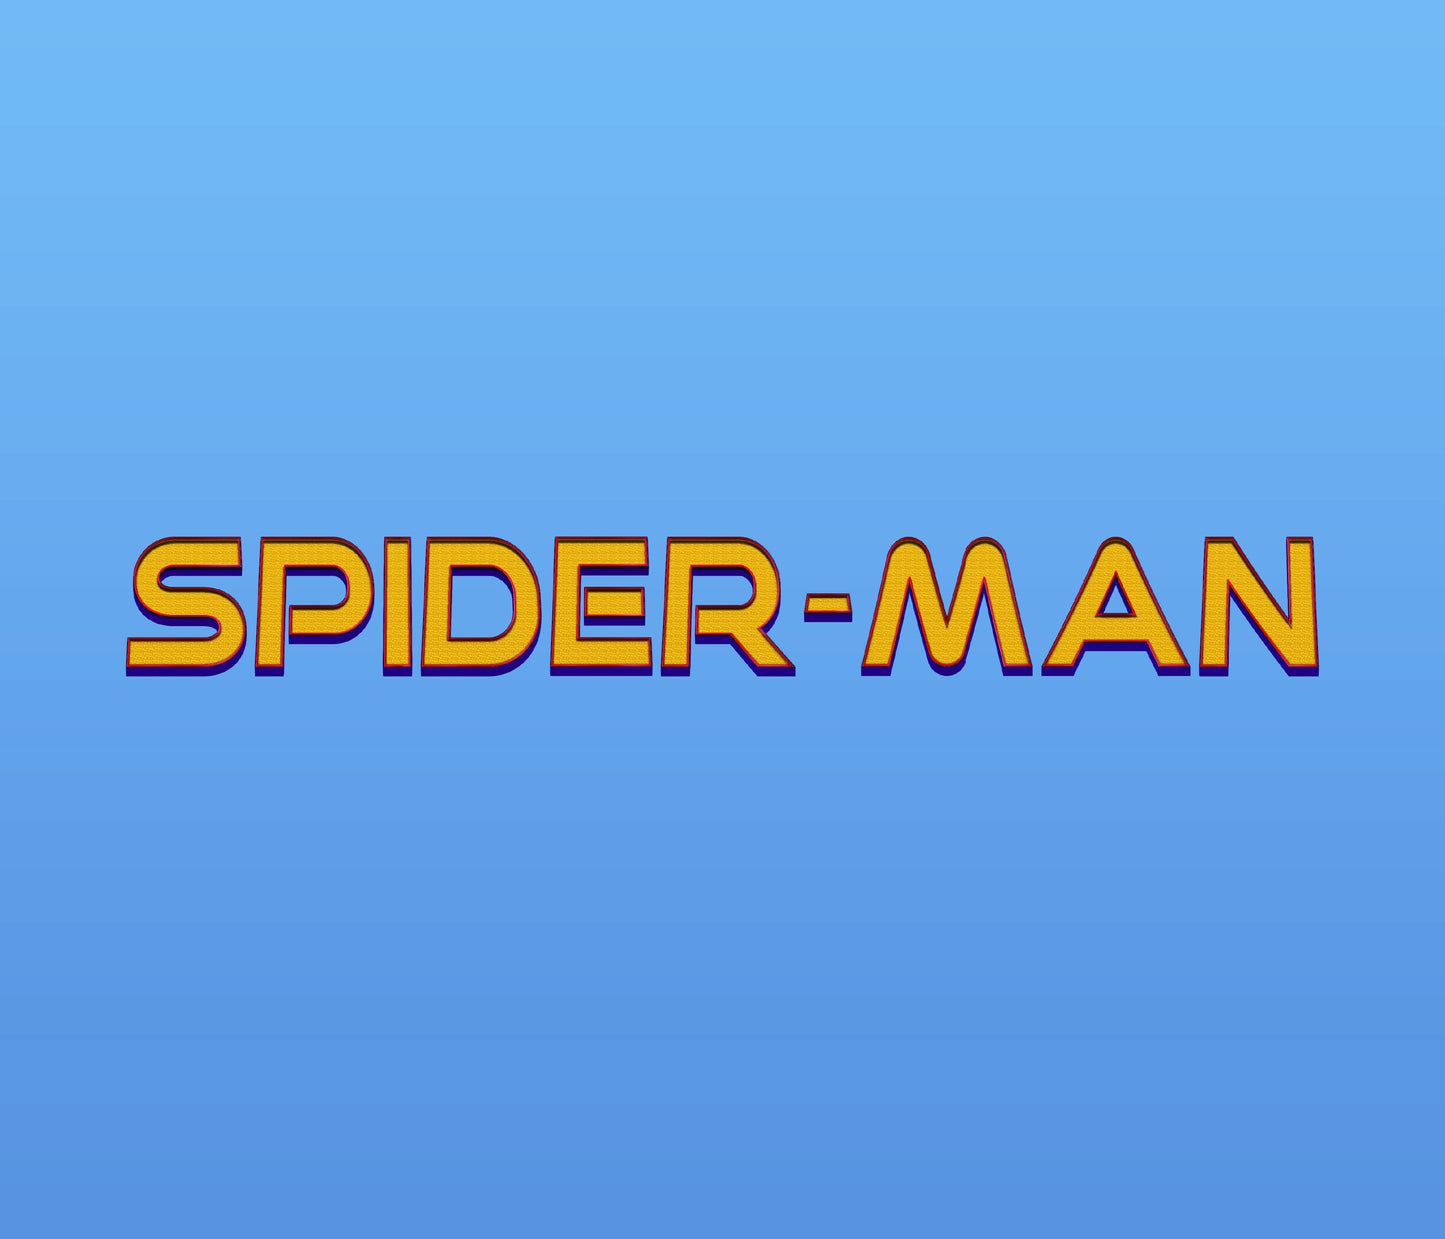 Spider-Man Homecoming Textured Font